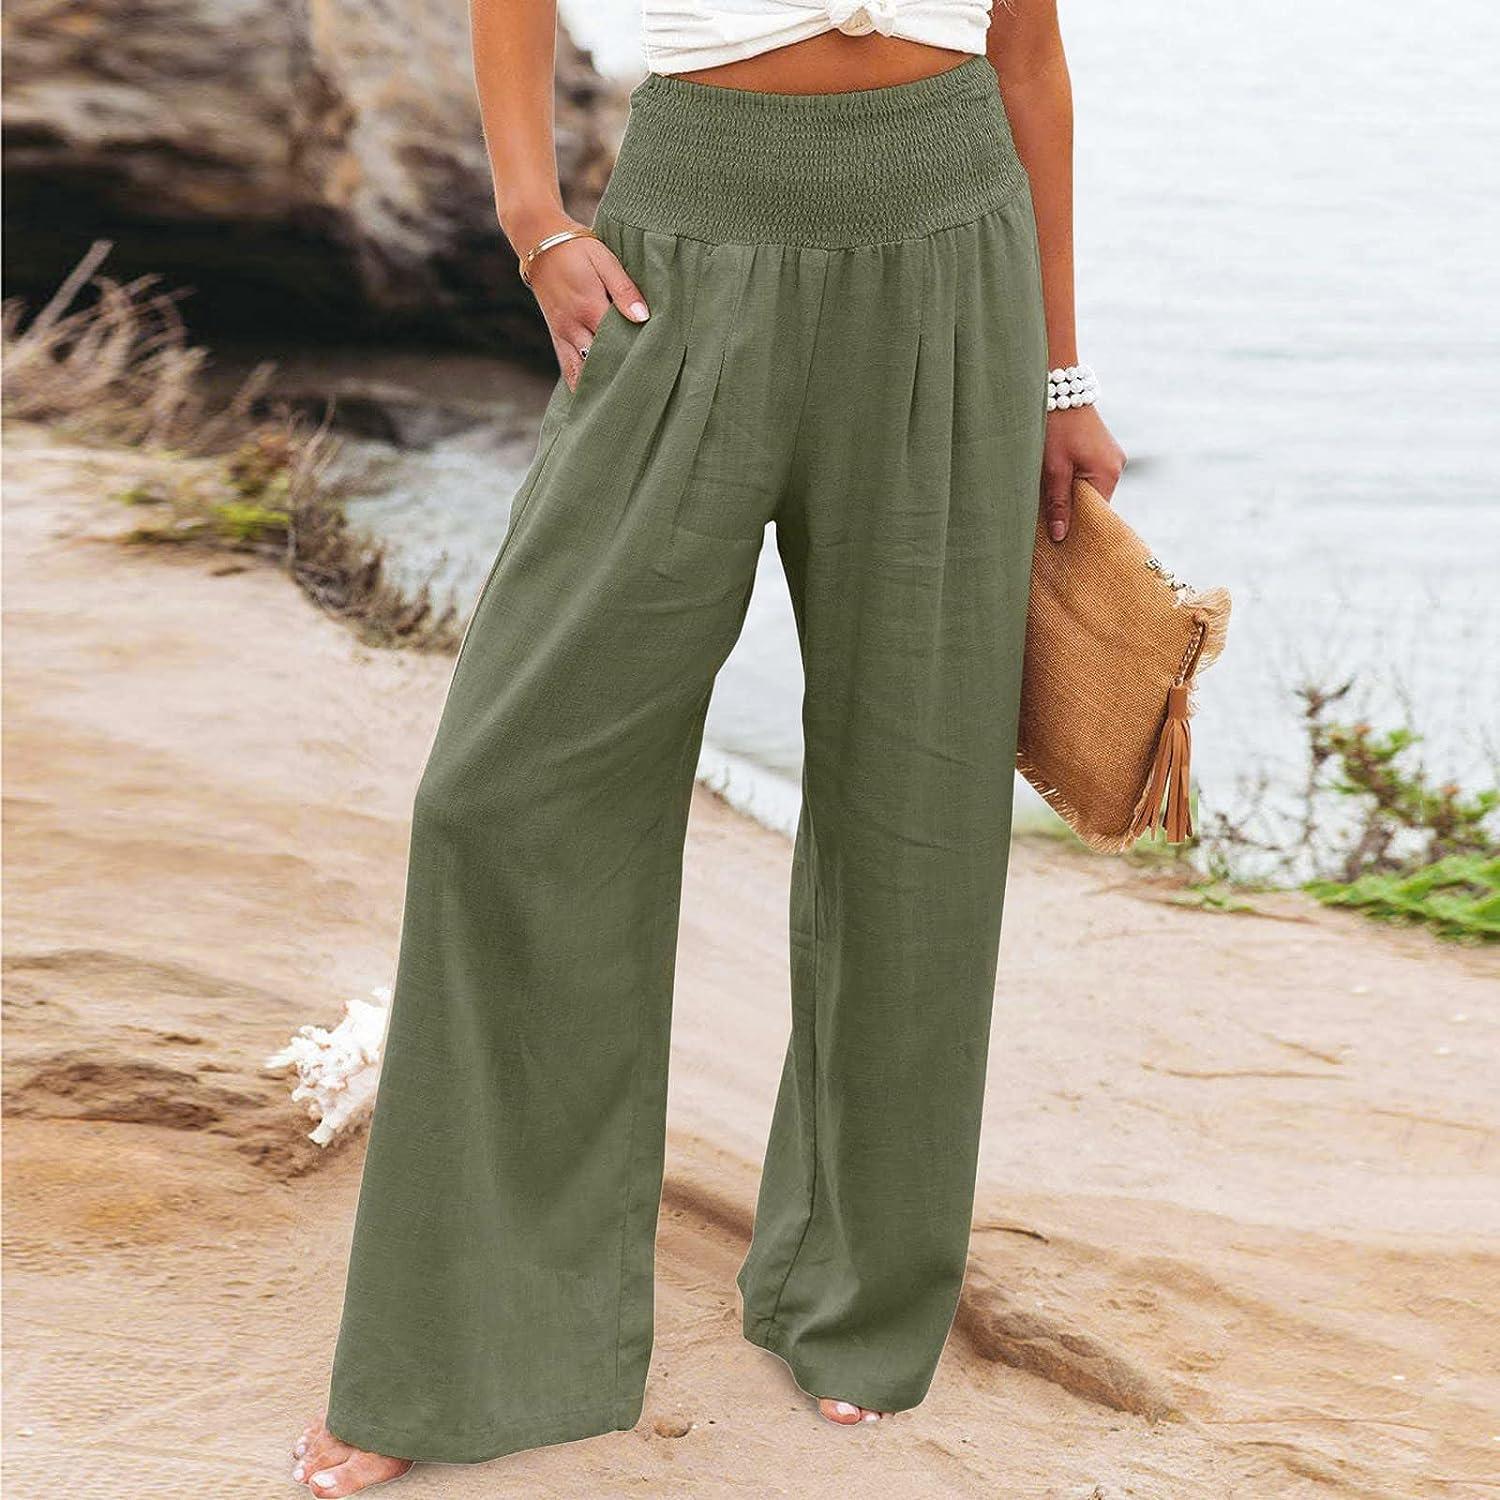 Womens Cotton Linen Wide Leg Pants Casual Summer High Waisted Palazzo Pants  Baggy Lounge Cargo Beach Trouser Loose Fit XX-Large A2-army Green